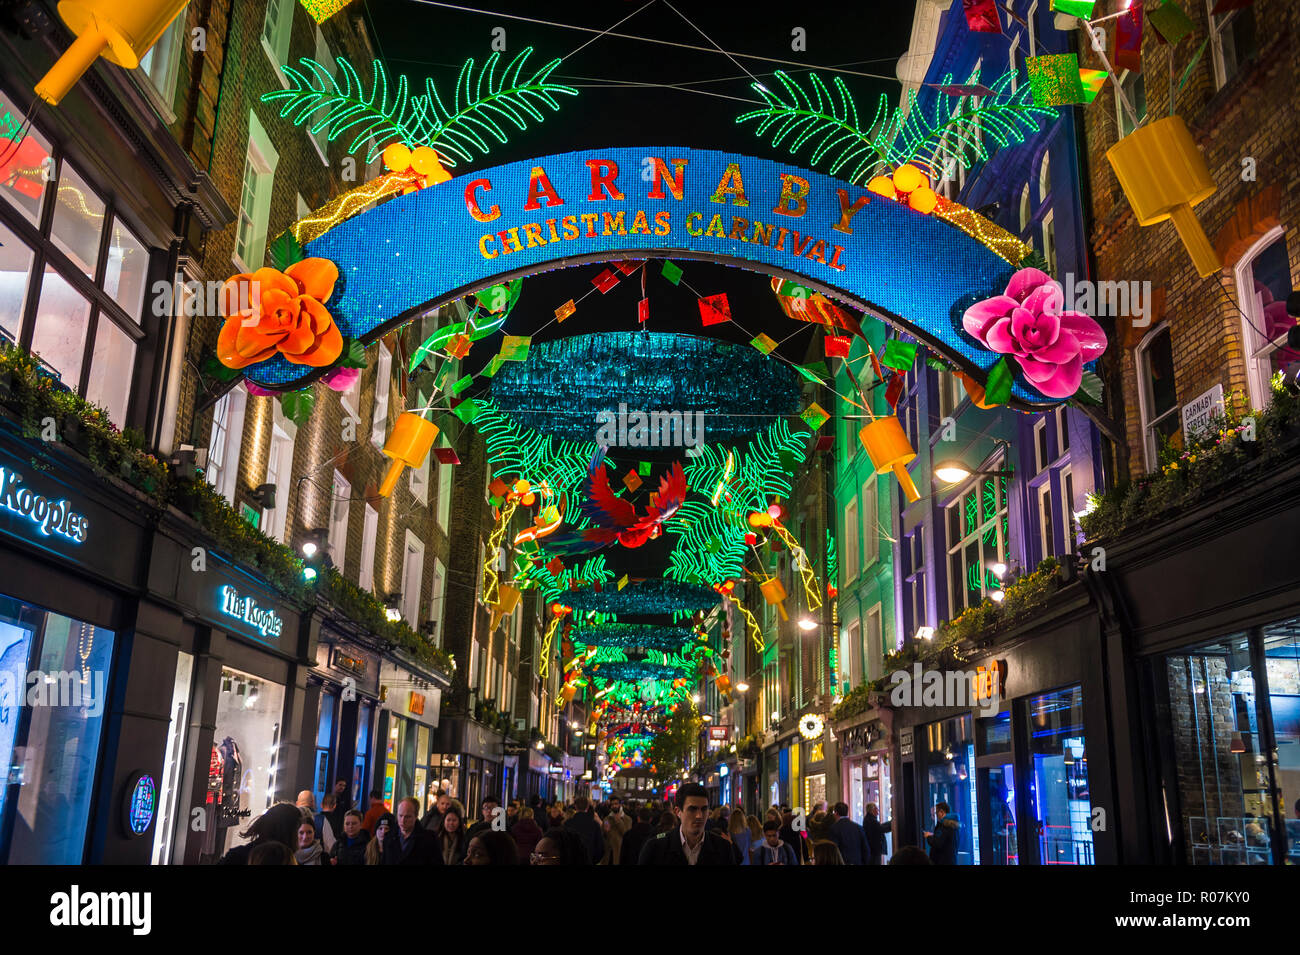 LONDON - CIRCA DECEMBER, 2017: Holiday crowds pass under Carnival themed Christmas signs in the pedestrianized shopping district of Carnaby Street. Stock Photo